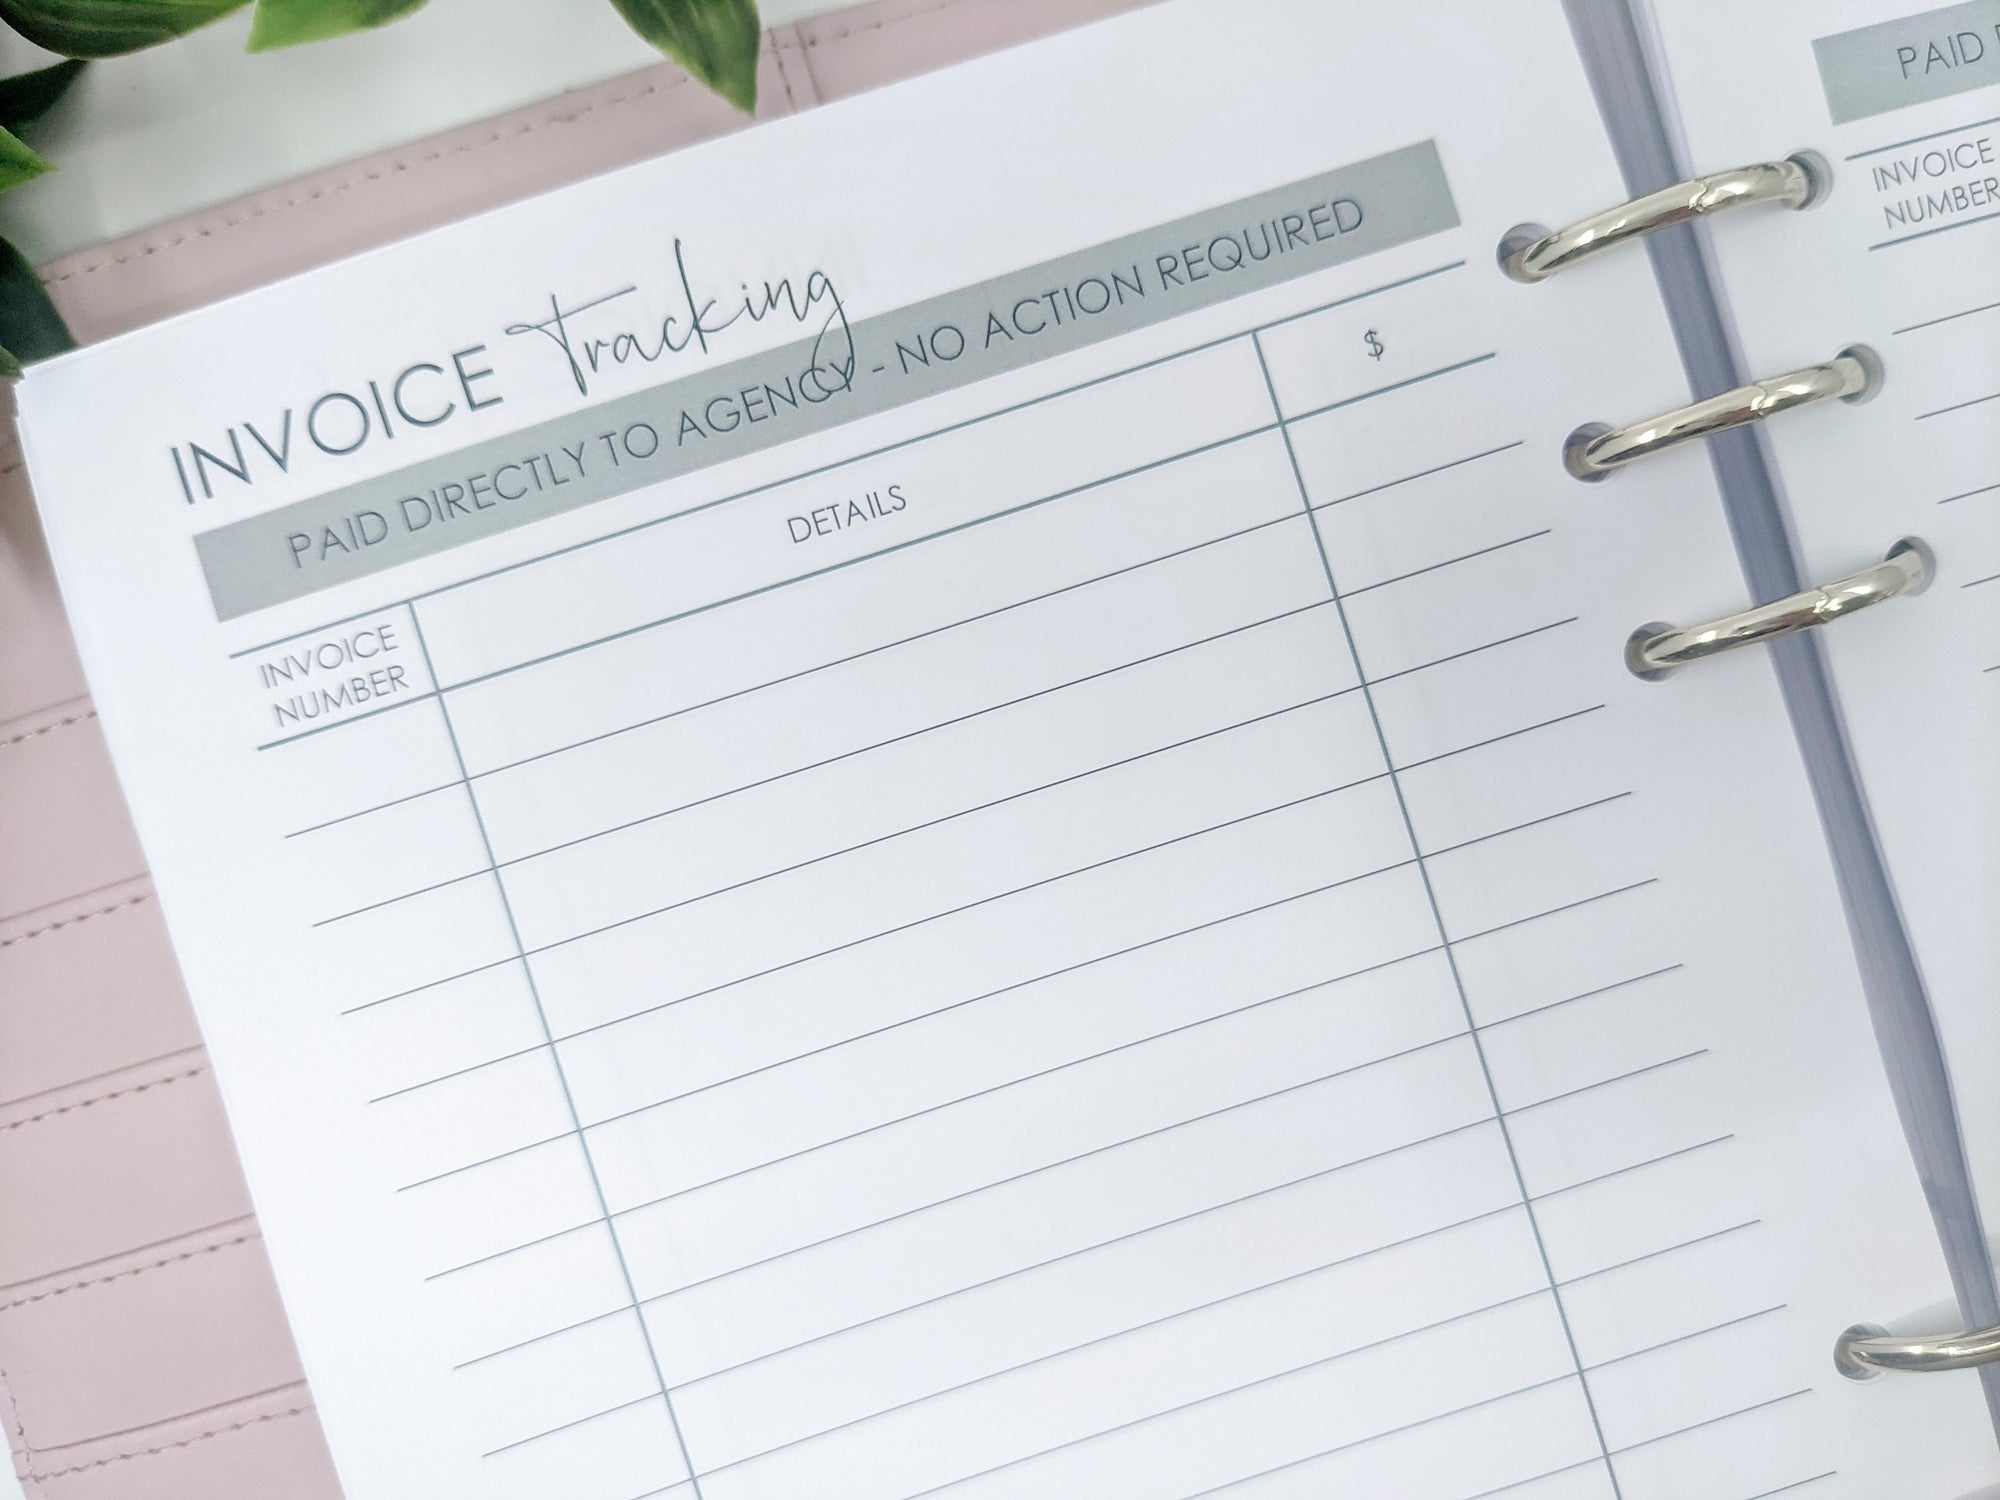 A5 Planner Invoice tracking for NDIS participants